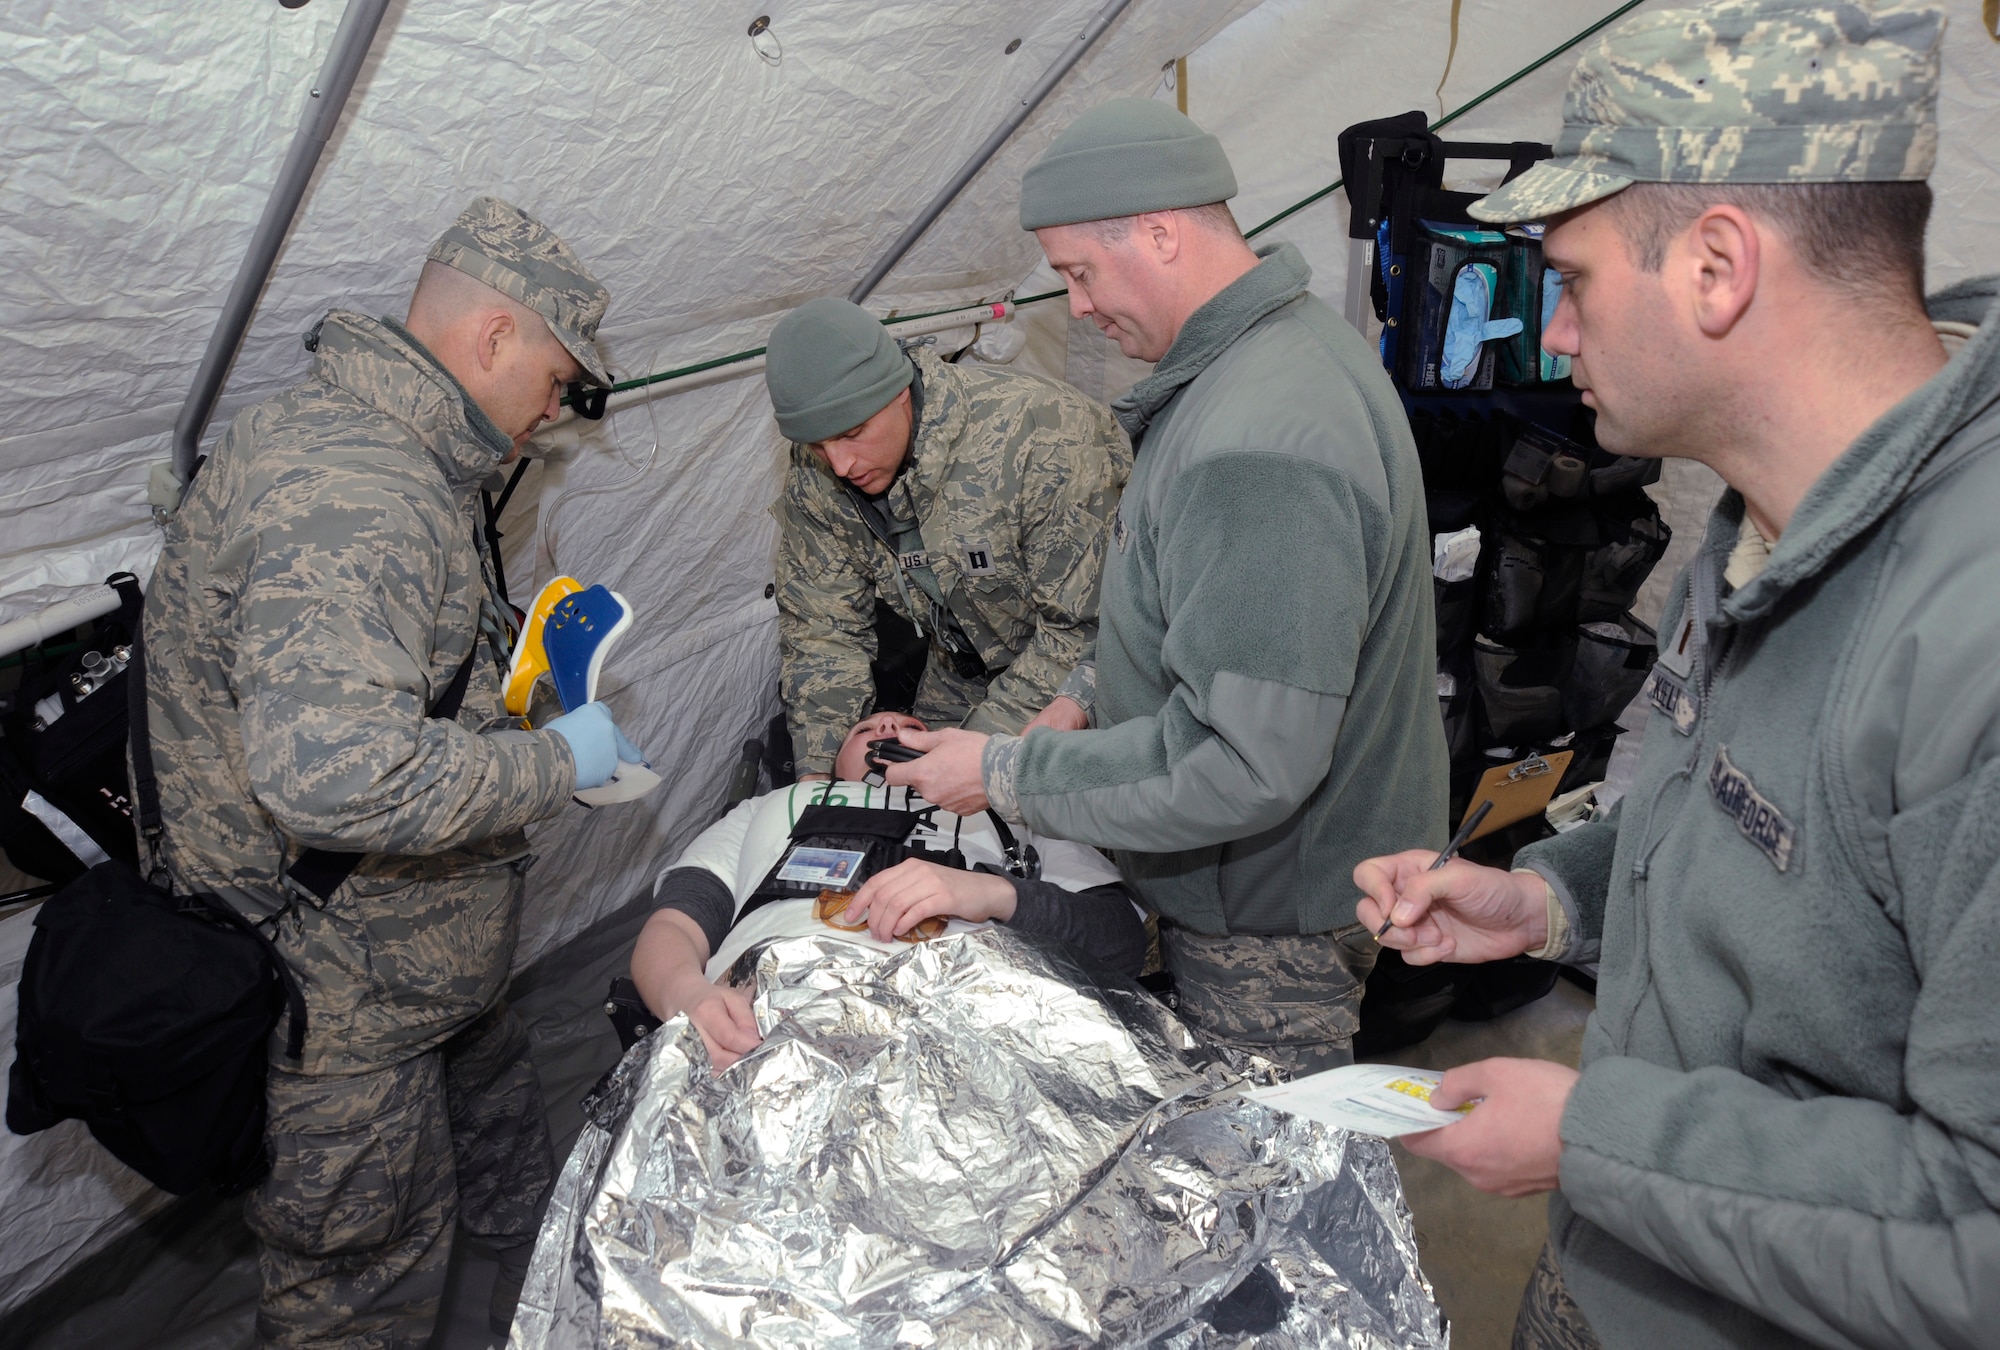 Air National Guard Members of the Oregon National Guard’s CBRNE Enhanced Response Force Package (CERFP), begin to treat a simulated victim during the Vigilant Guard-Alaska 2014 exercise, near Joint Base Elmendorf-Richardson, Anchorage, Alaska, March 29, 2014. (U.S. Air National Guard photo by Tech. Sgt. John Hughel, 142nd Fighter Wing Public Affairs/Released)